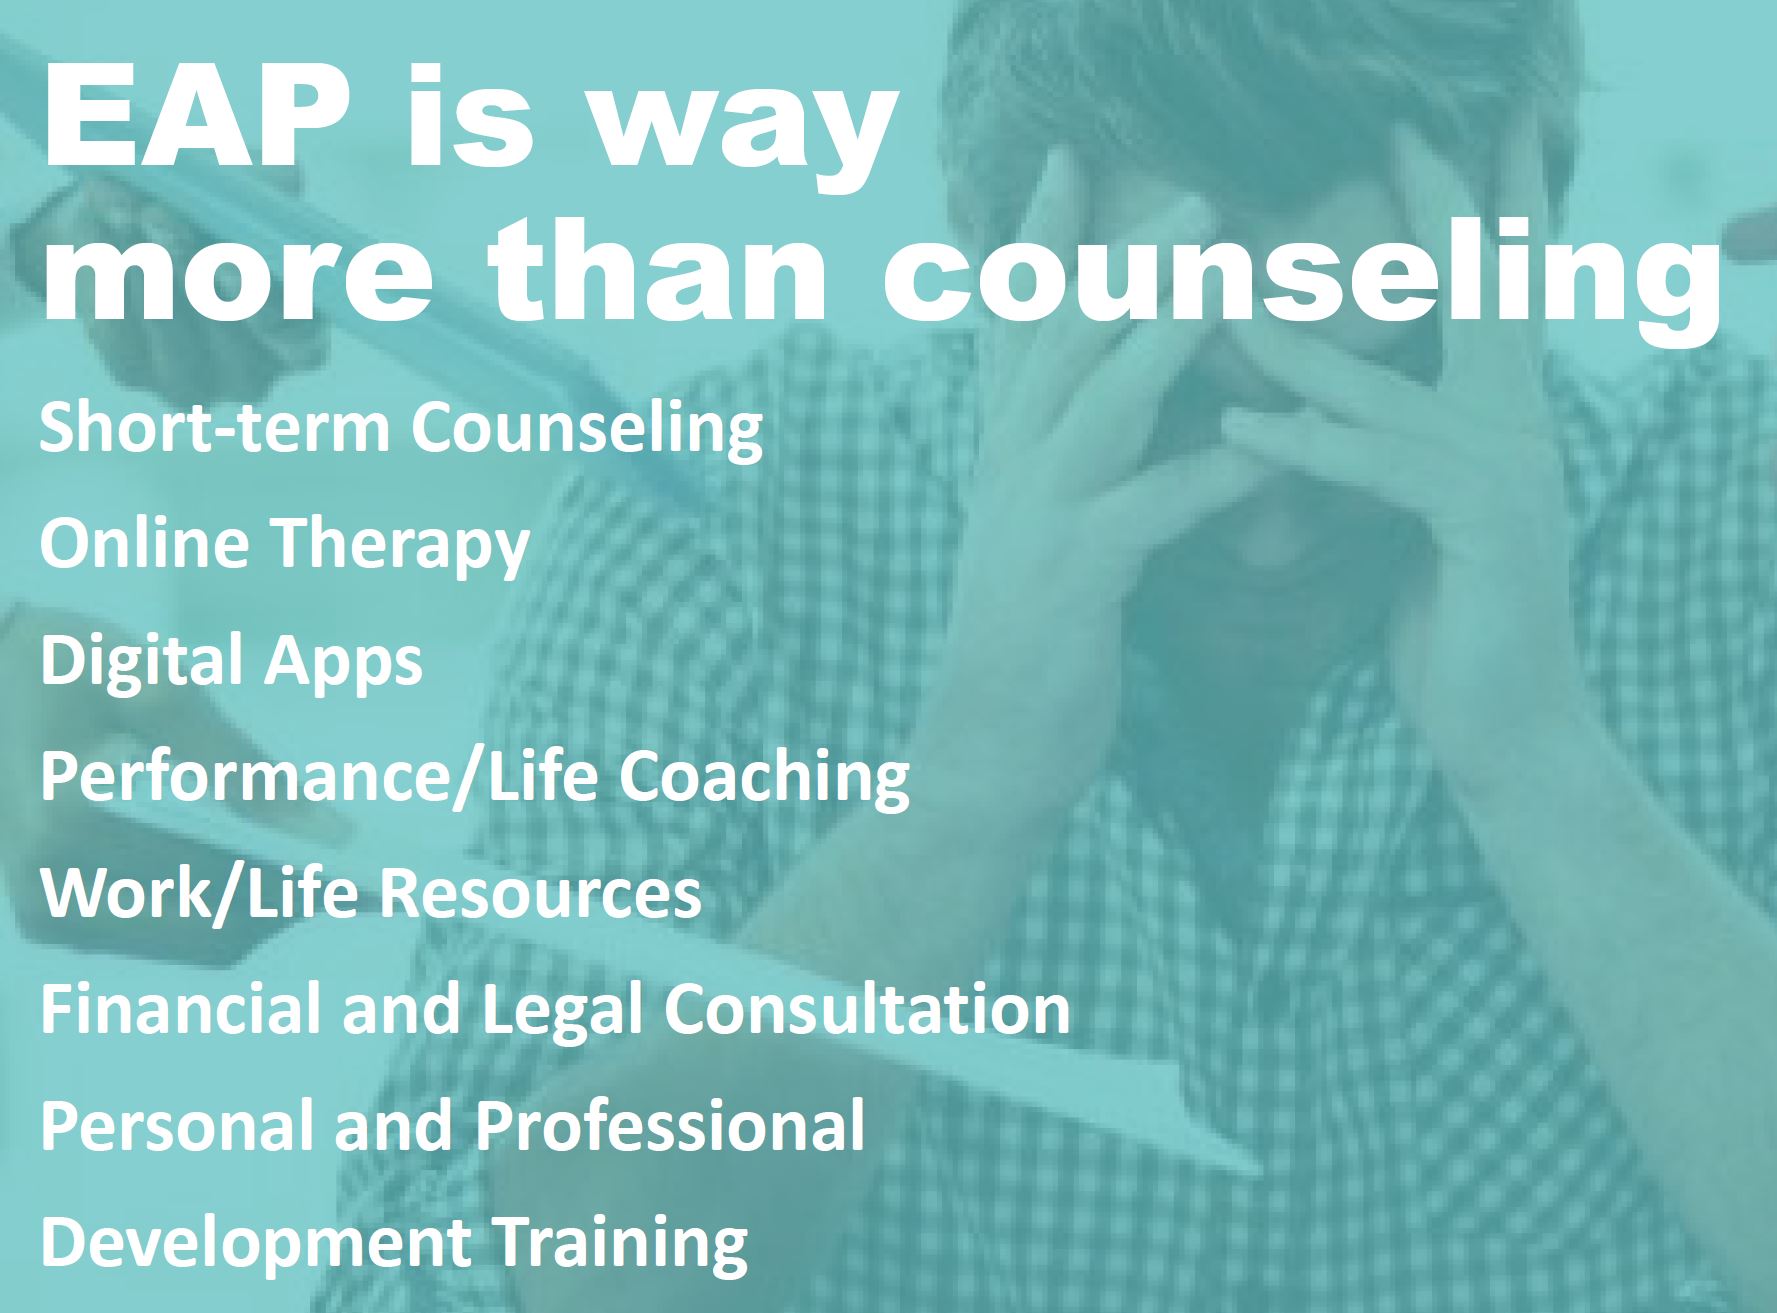 EAP is way more than counseling. Short-term counseling Online therapy Digital Apps Performance/Life Coaching Work/Life Resources Financial and Legal Consultation Personal & Professional Development Training.